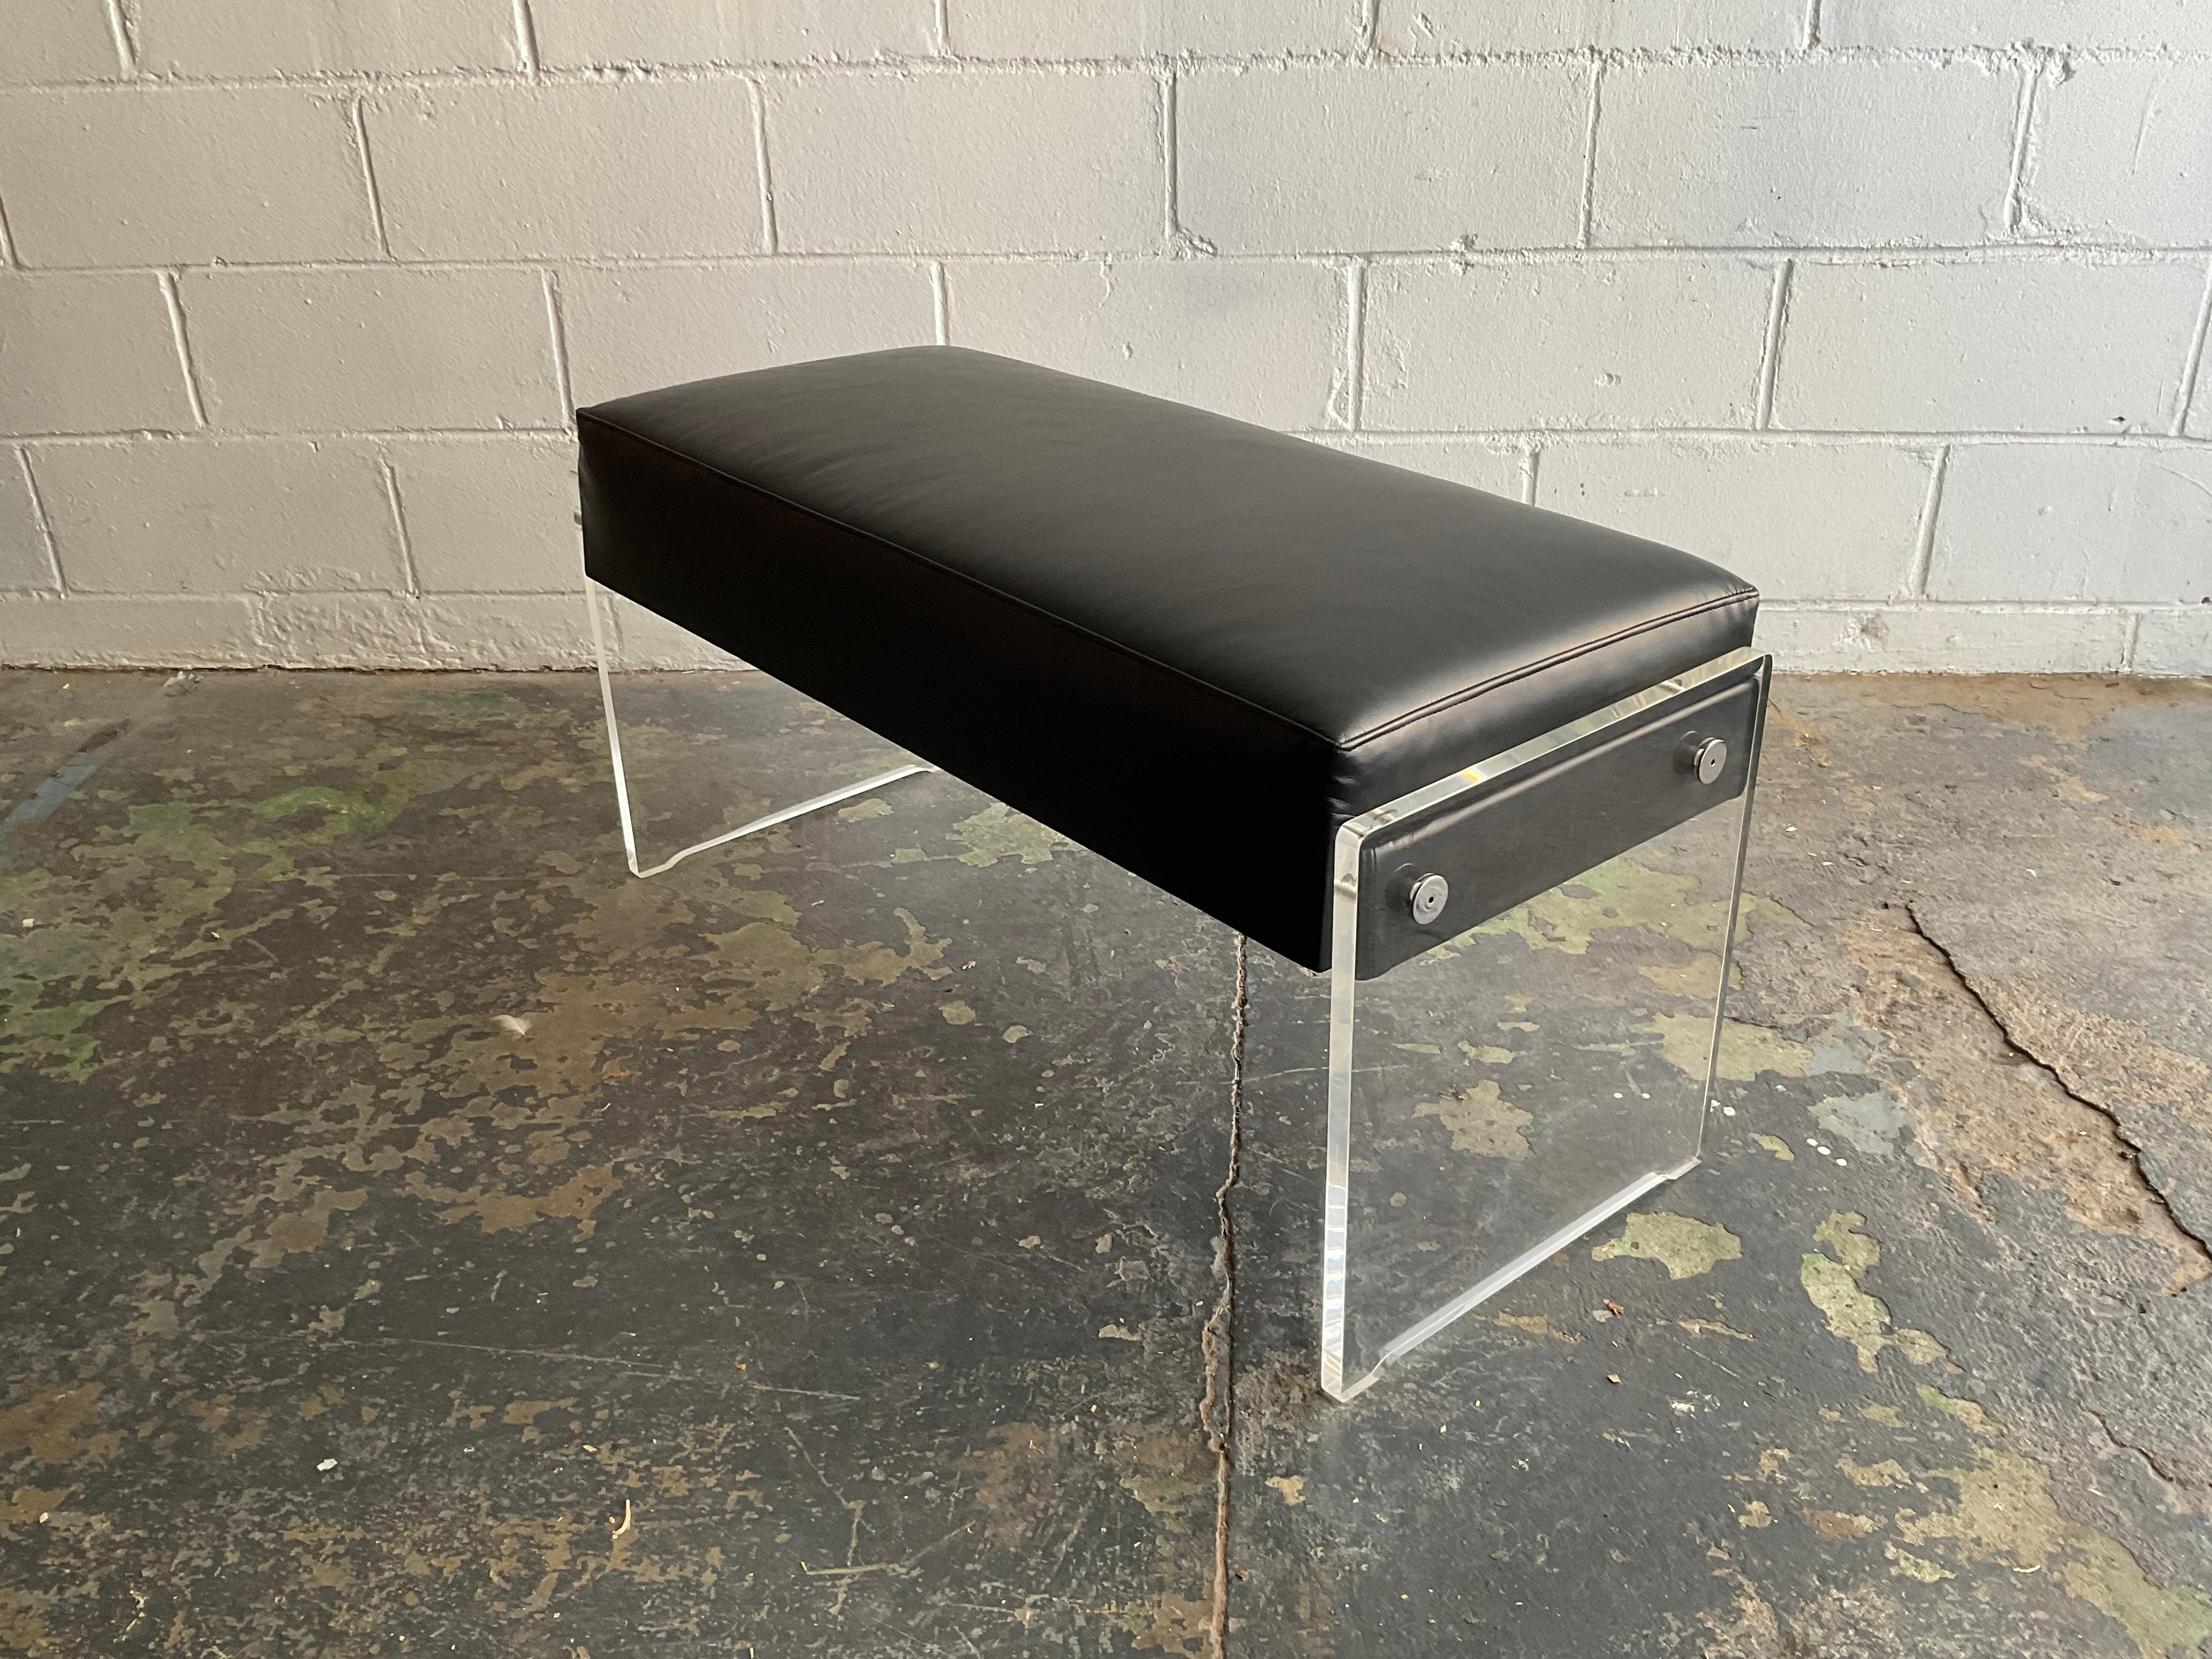 Vintage Lucite, Chrome & Black Leather Bench with Storage Compartment, 1970s For Sale 2